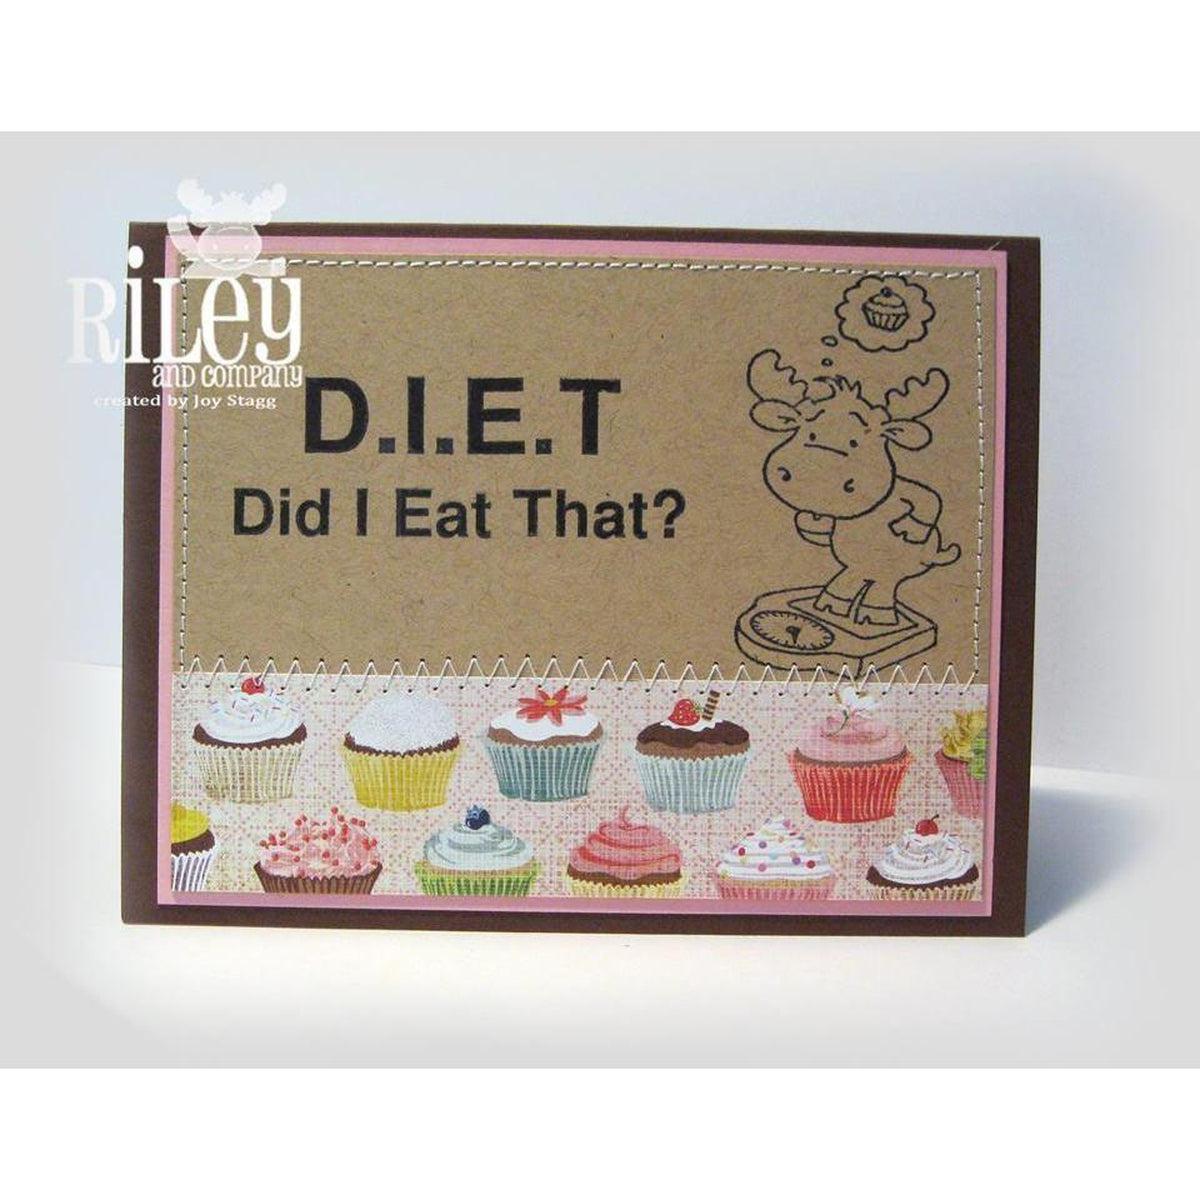 DIET Cling Stamp by Riley &amp; Co - Kat Scrappiness